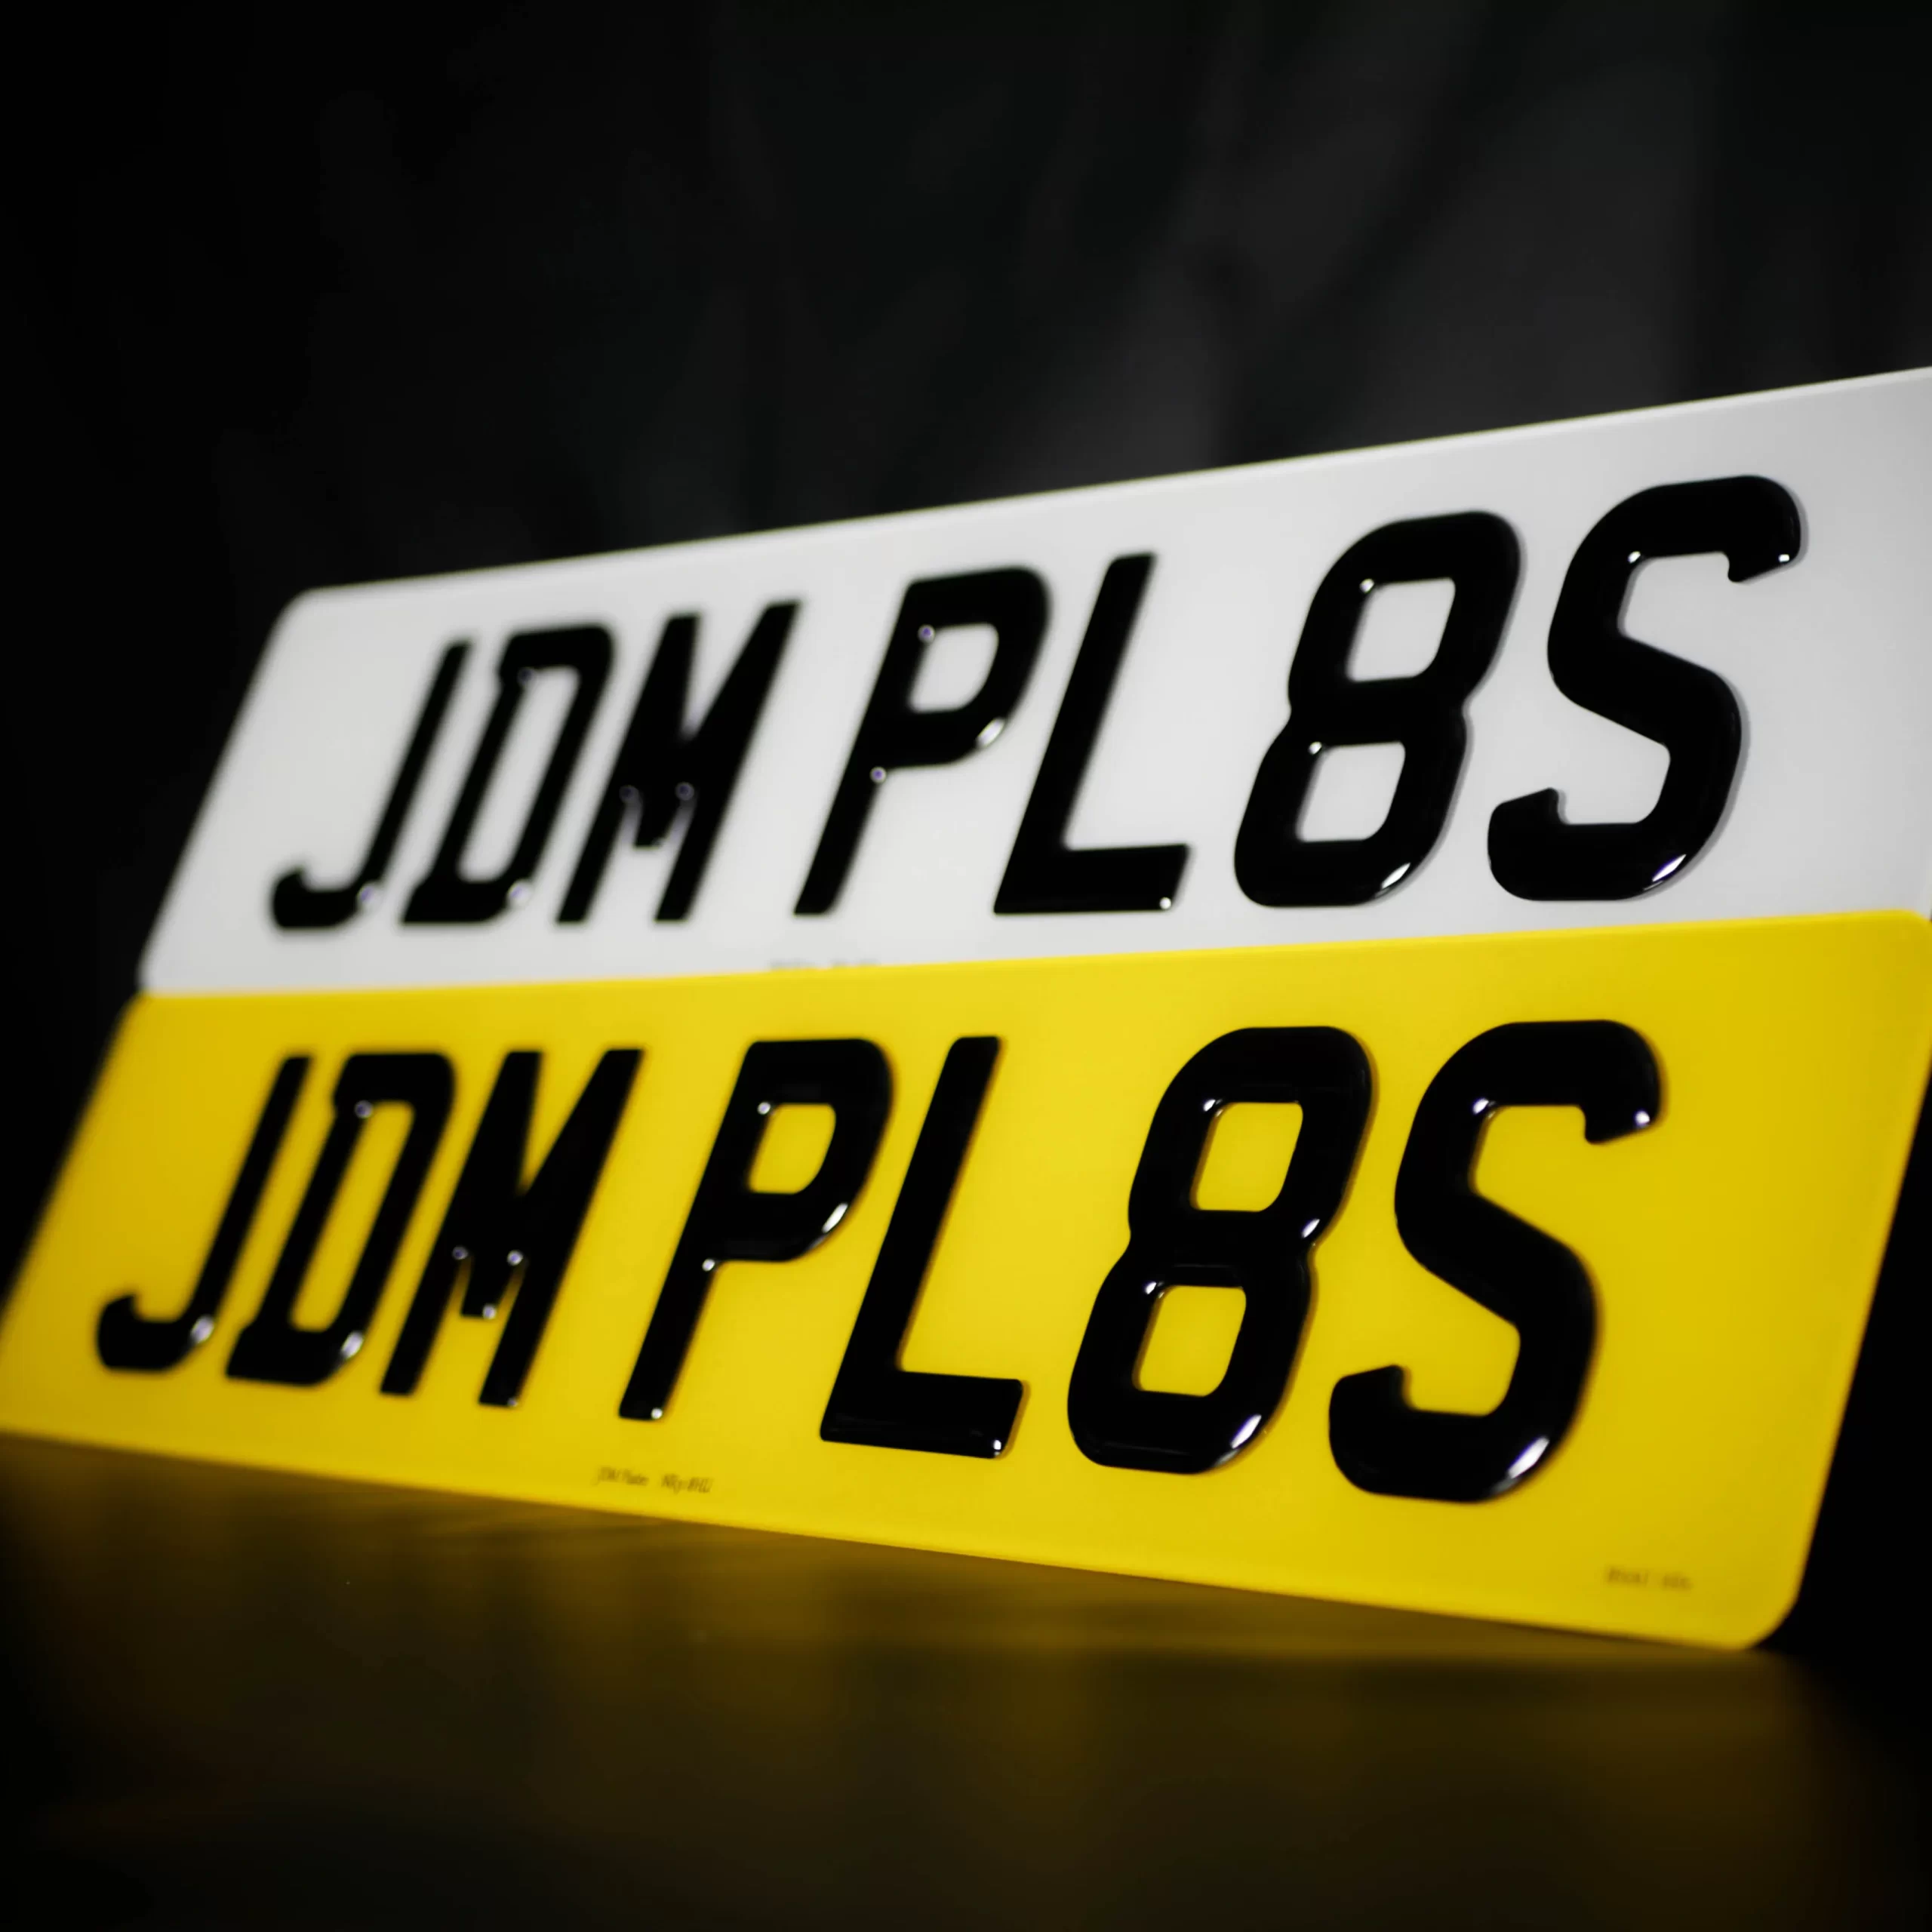 Are 3D and 4D number plates legal in the UK?